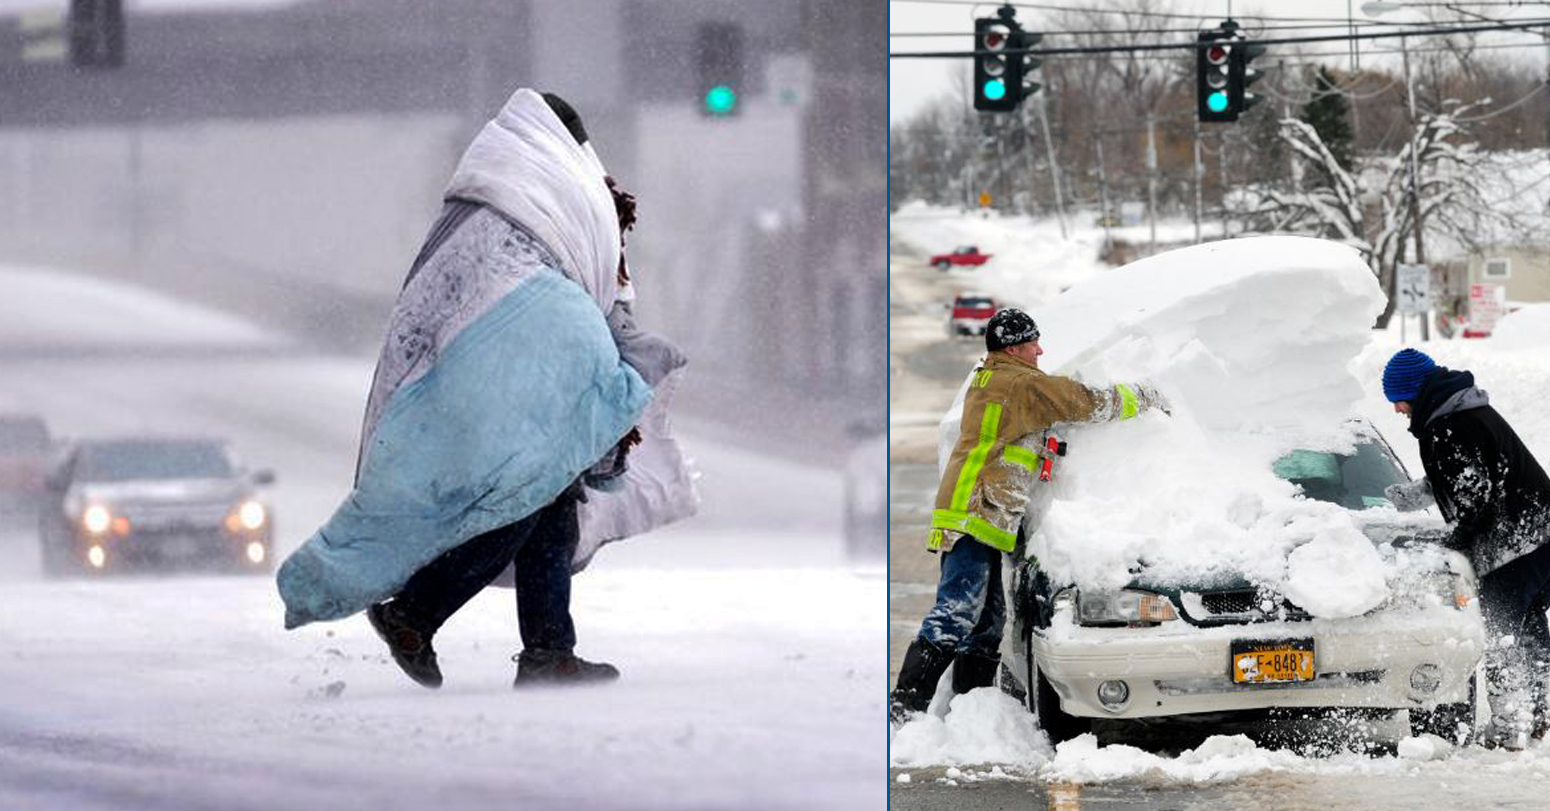 ‘Blizzard of the century’ leaves nearly 50 dead across US